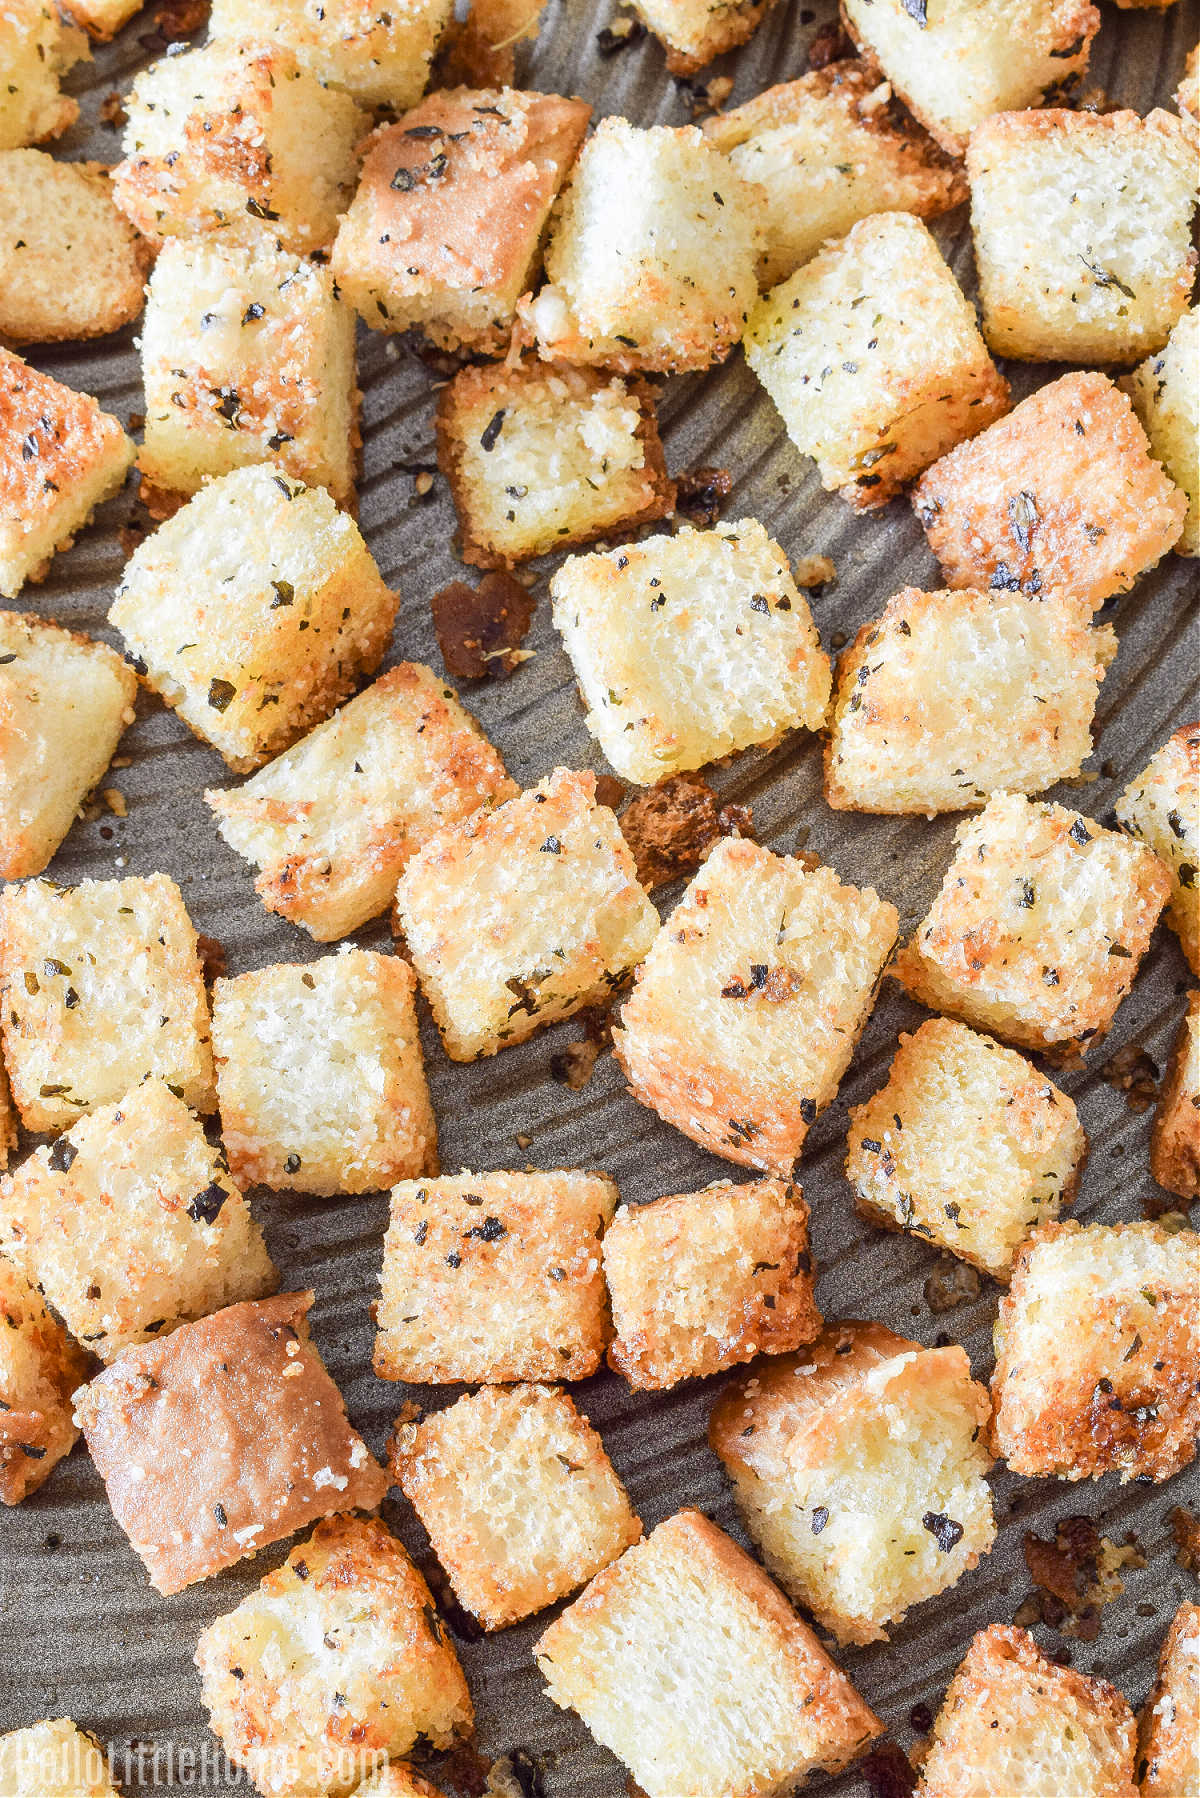 The finished seasoned bread cubes on a baking sheet.